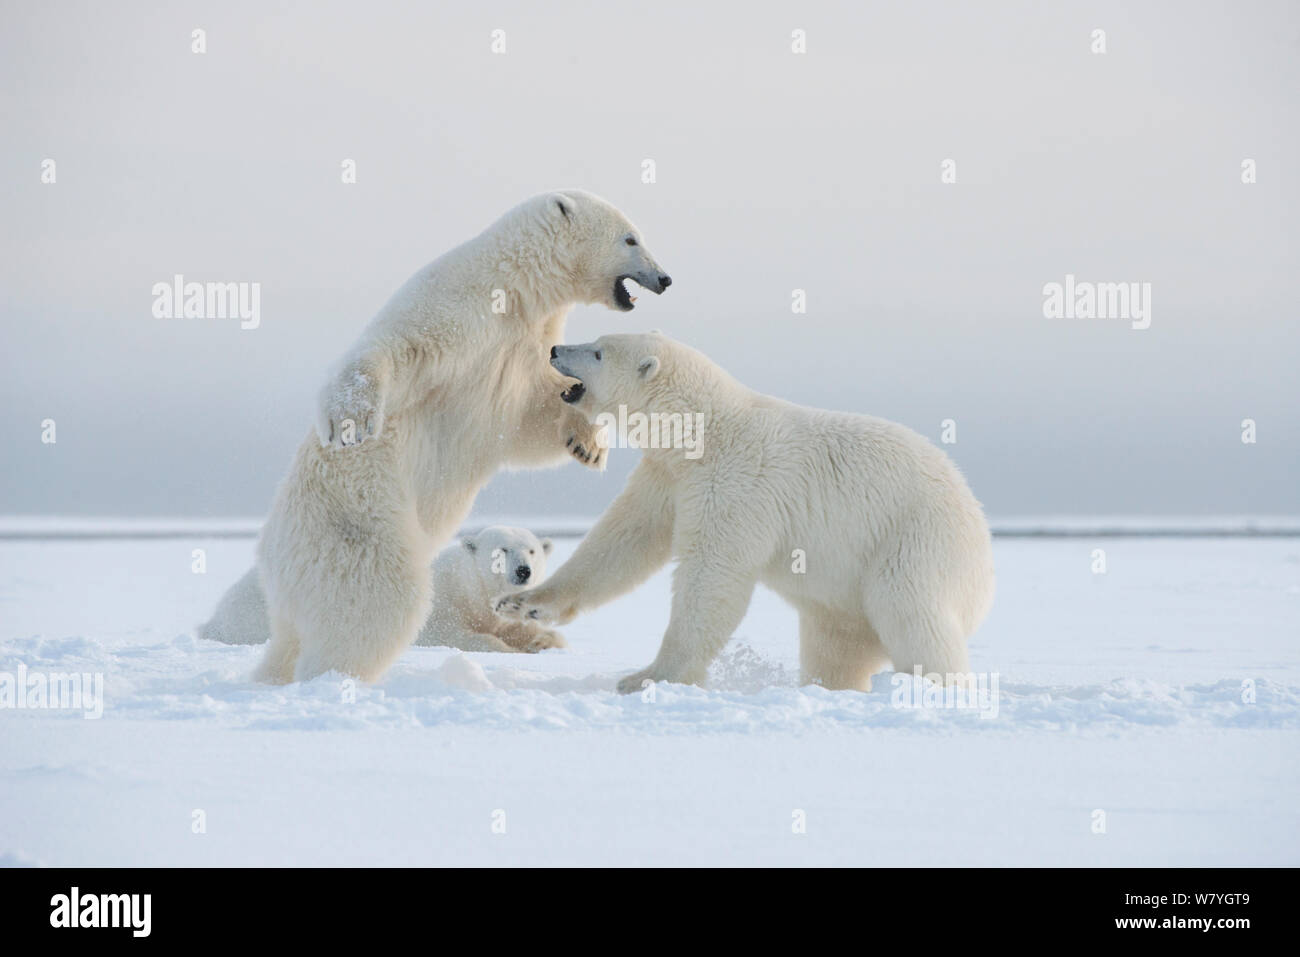 Polar bear (Ursus maritimus) mother resting as her juveniles play fight on newly forming pack ice during autumn freeze up, Beaufort Sea, off Arctic coast, Alaska Stock Photo